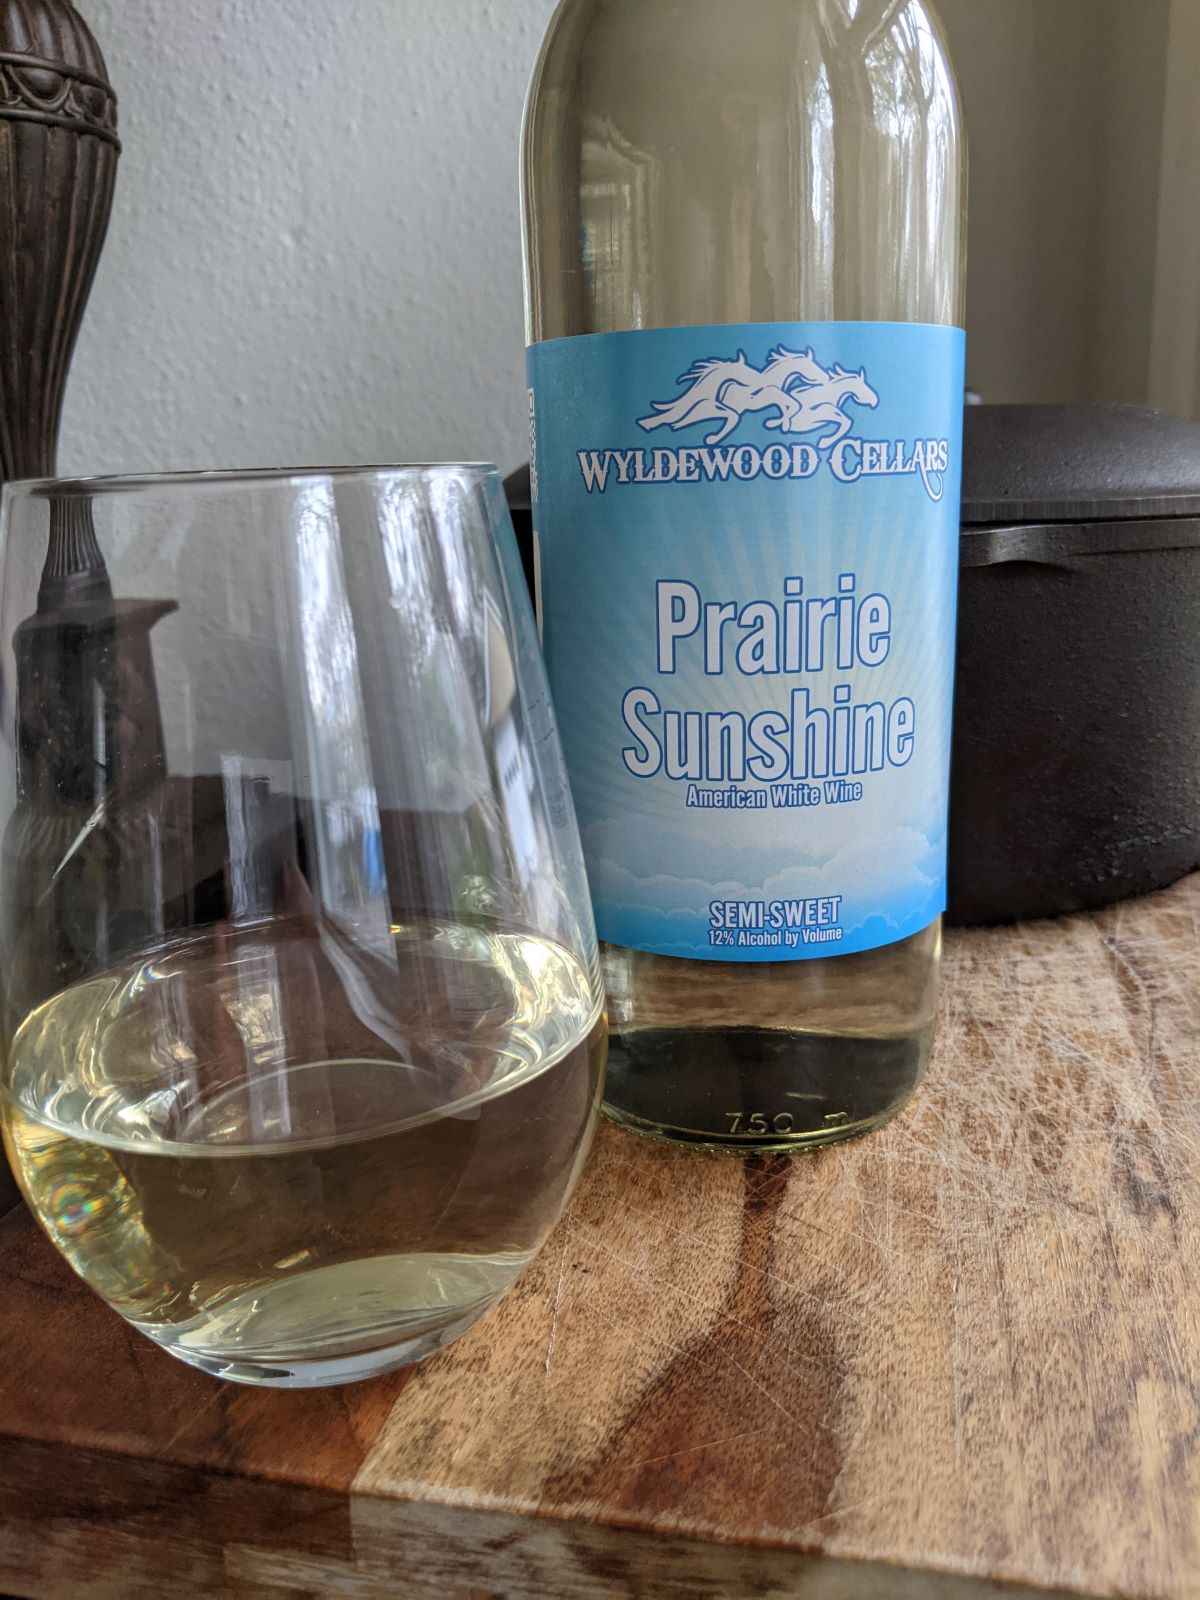 In the forefront of the picture is a bottle of white wine with a blue â€œPrairie Sunshineâ€ label and a glass of wine.  The glass and bottle sit atop a wooden block.  Behind these, we can see a black cast iron dutch oven and a bronze lamp. Photo by Tias Paul.